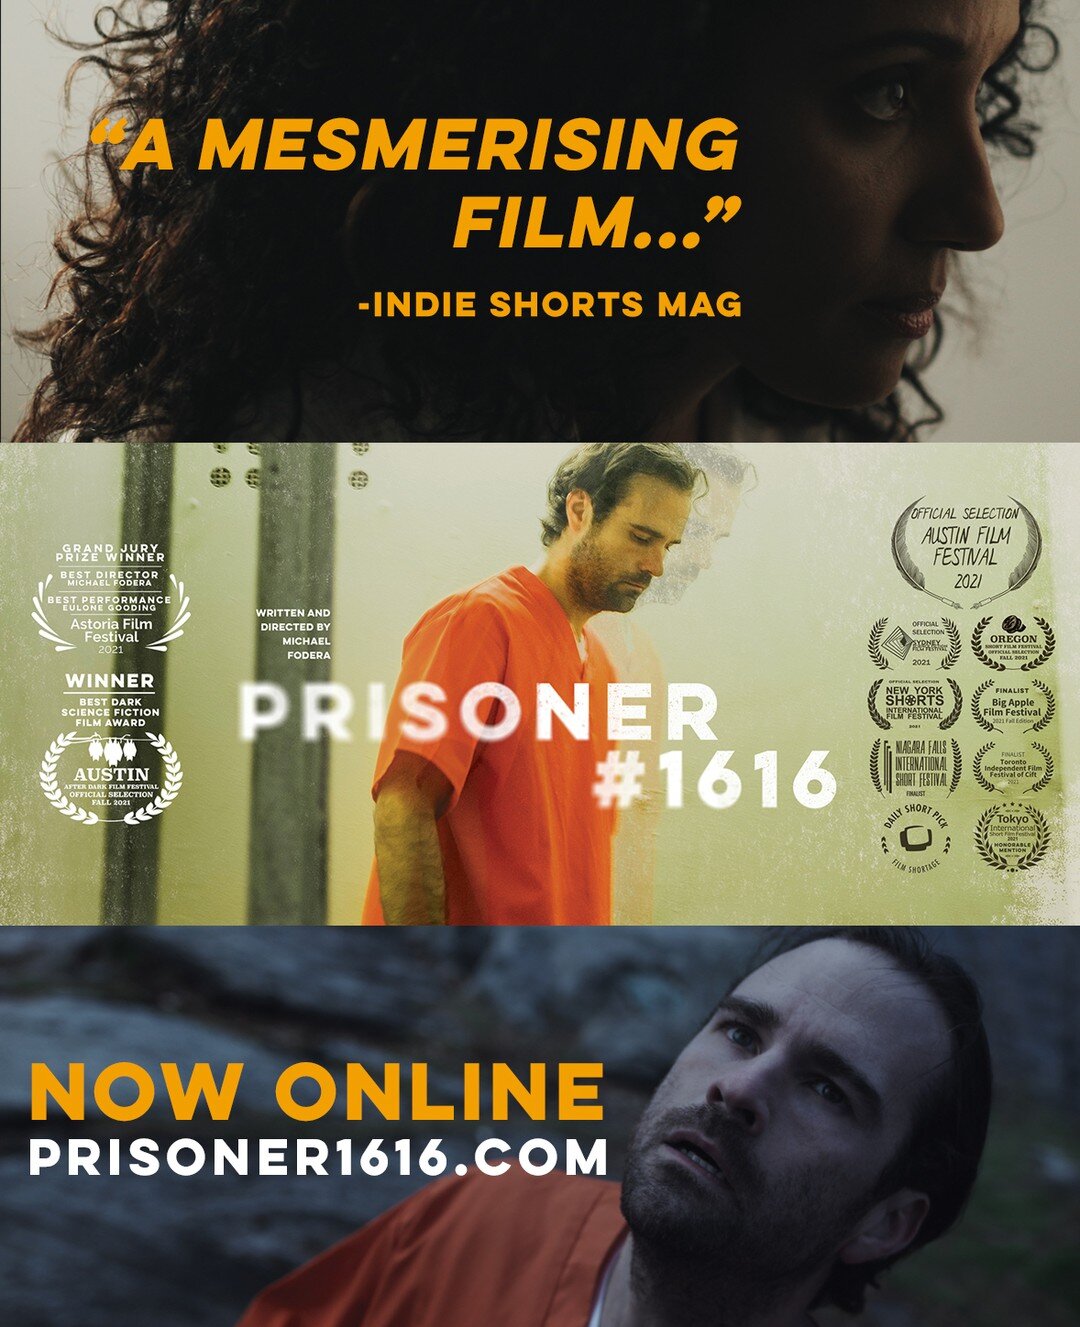 &quot;A mesmerising film...&quot; - Indie Shorts Mag @indieshortsmag.
#Prisoner1616 is now available online at www.Prisoner1616.com

#filmmaker #filmmaking #film #onlinepremiere #cinematography #director #cinema #movie #cinematographer #movies #actor